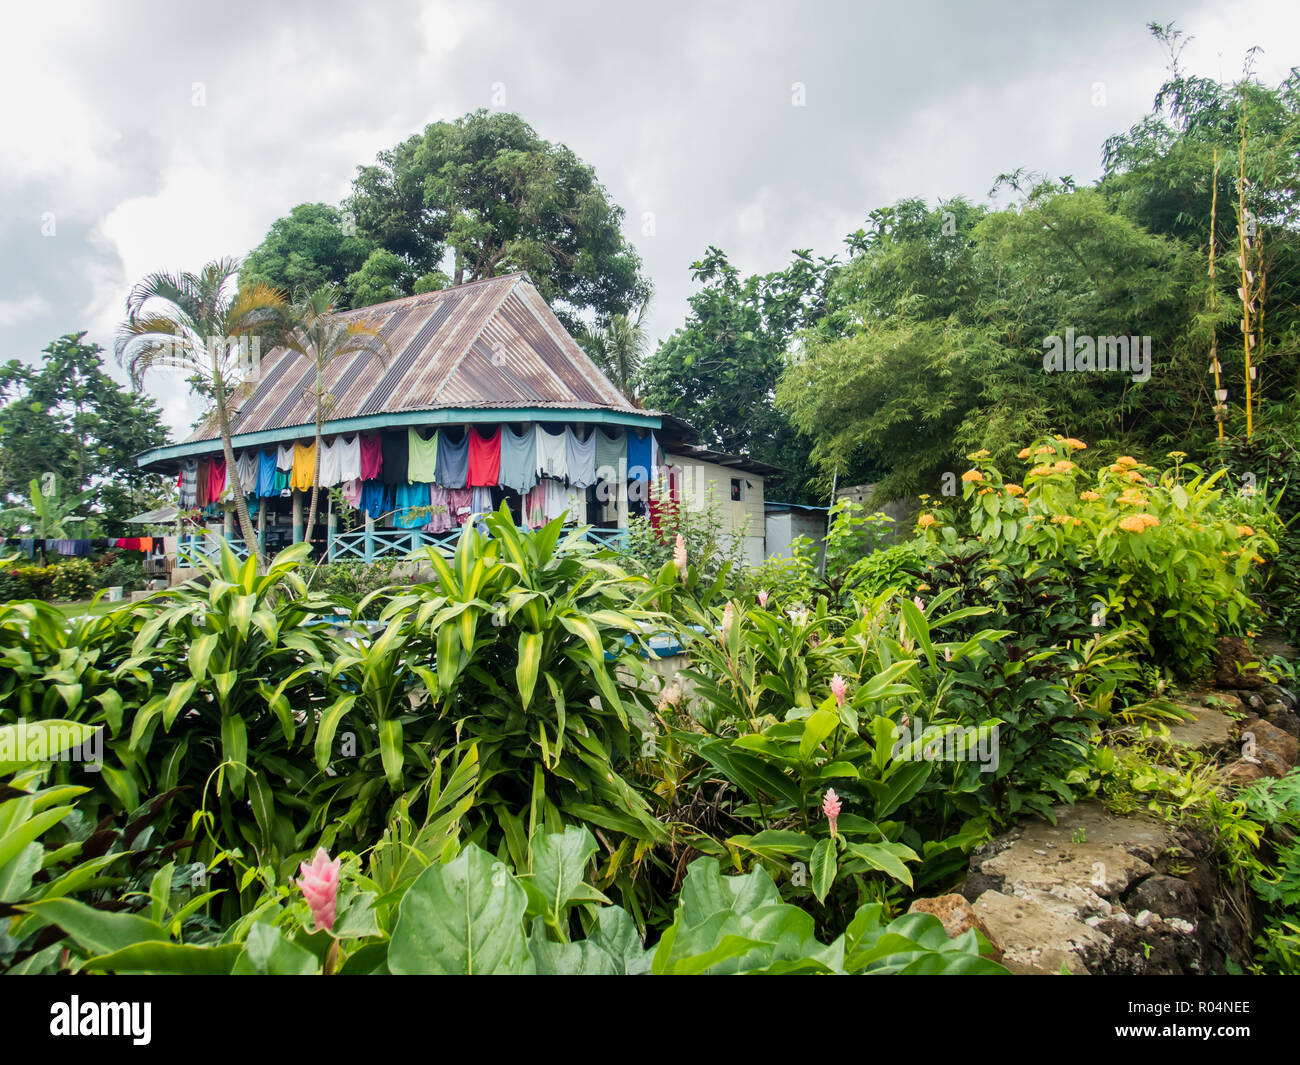 A family home in the town of Lufilufi on the island of Upolu, Samoa, South Pacific Islands, Pacific Stock Photo